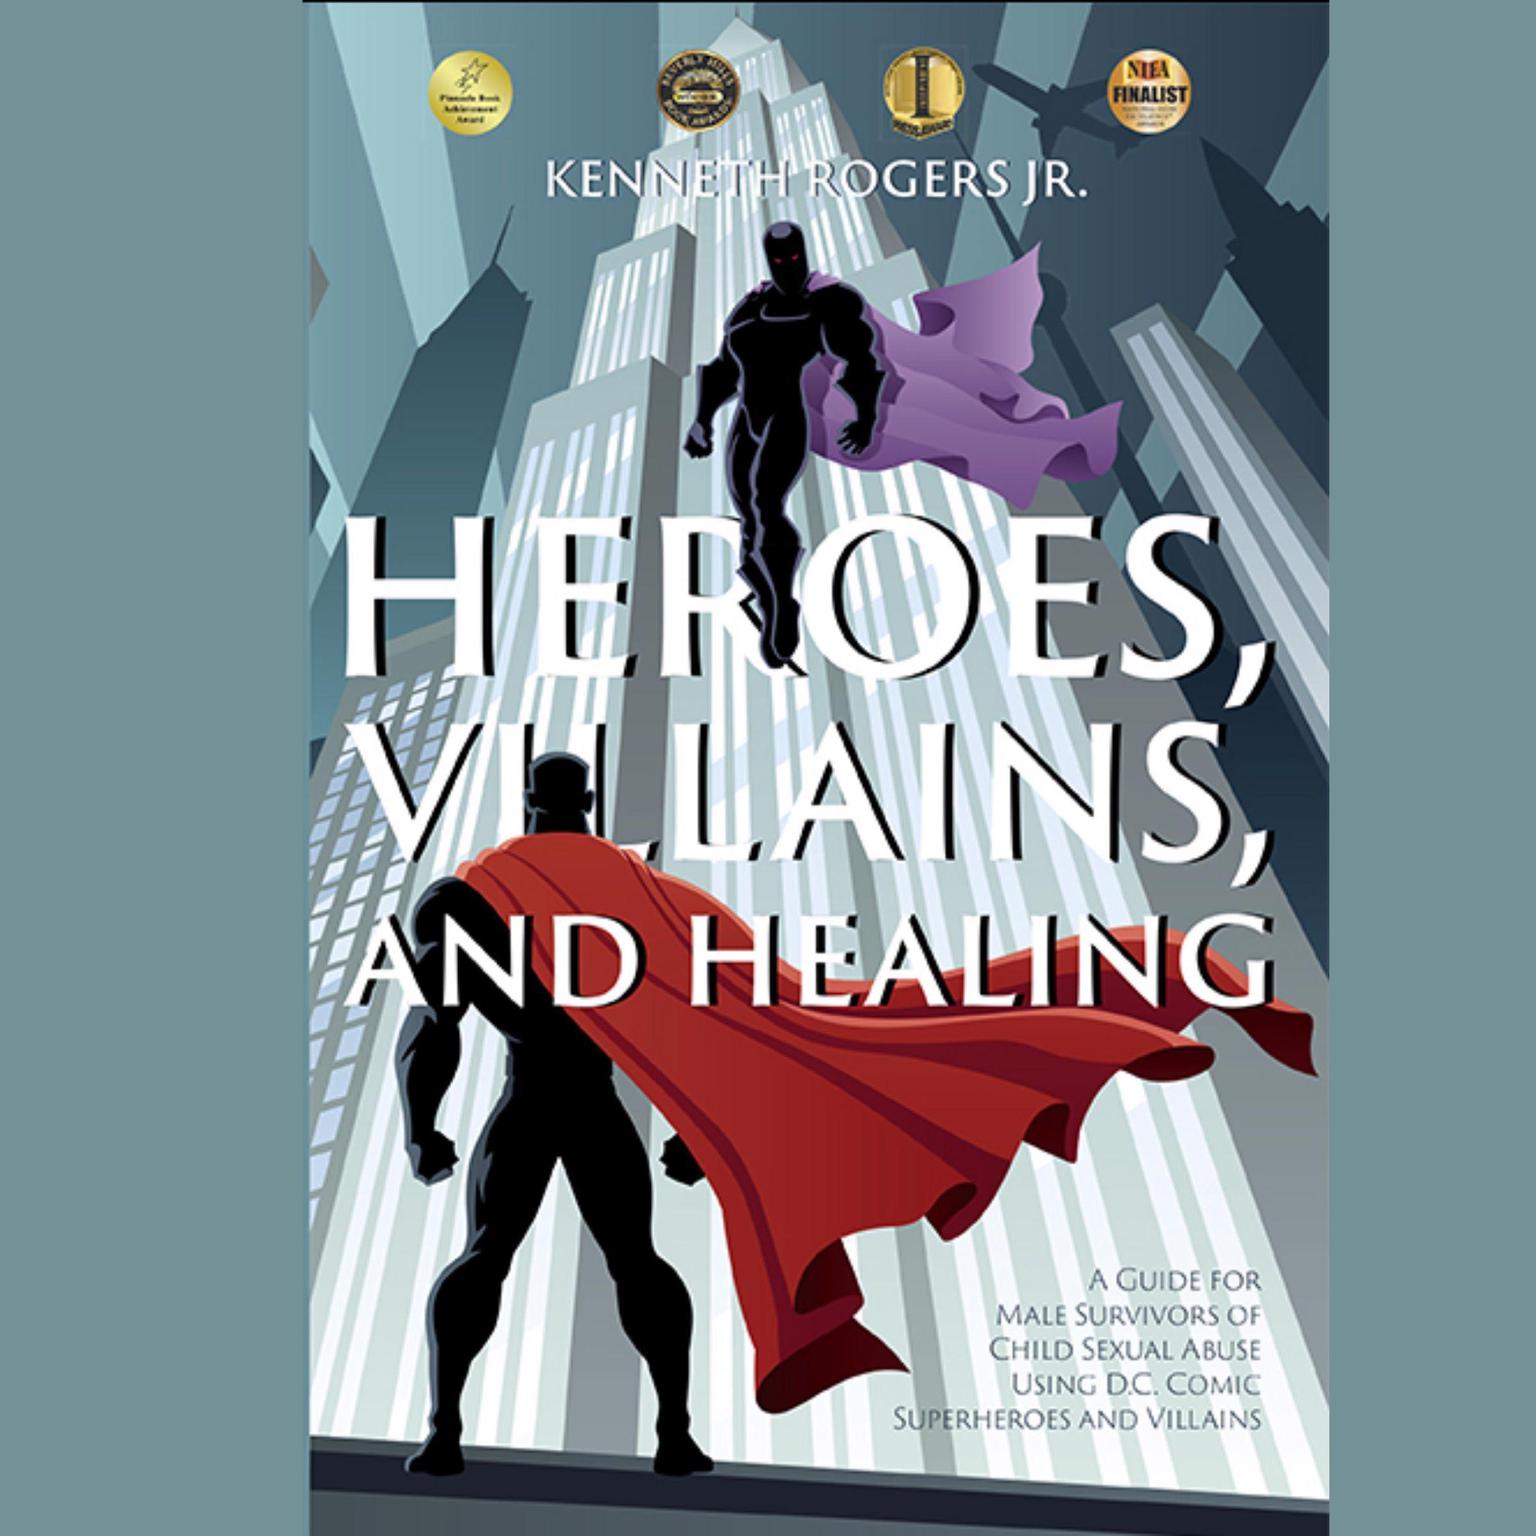 Heroes, Villains, and Healing: A Guide for Male Survivors of Childhood Sexual Abuse Using DC Comic Superheroes and Villains (Abridged): A Guide for Male Survivors of Childhood Sexual Abuse Using DC Comic Superheroes and Villains Audiobook, by Kenneth Rogers